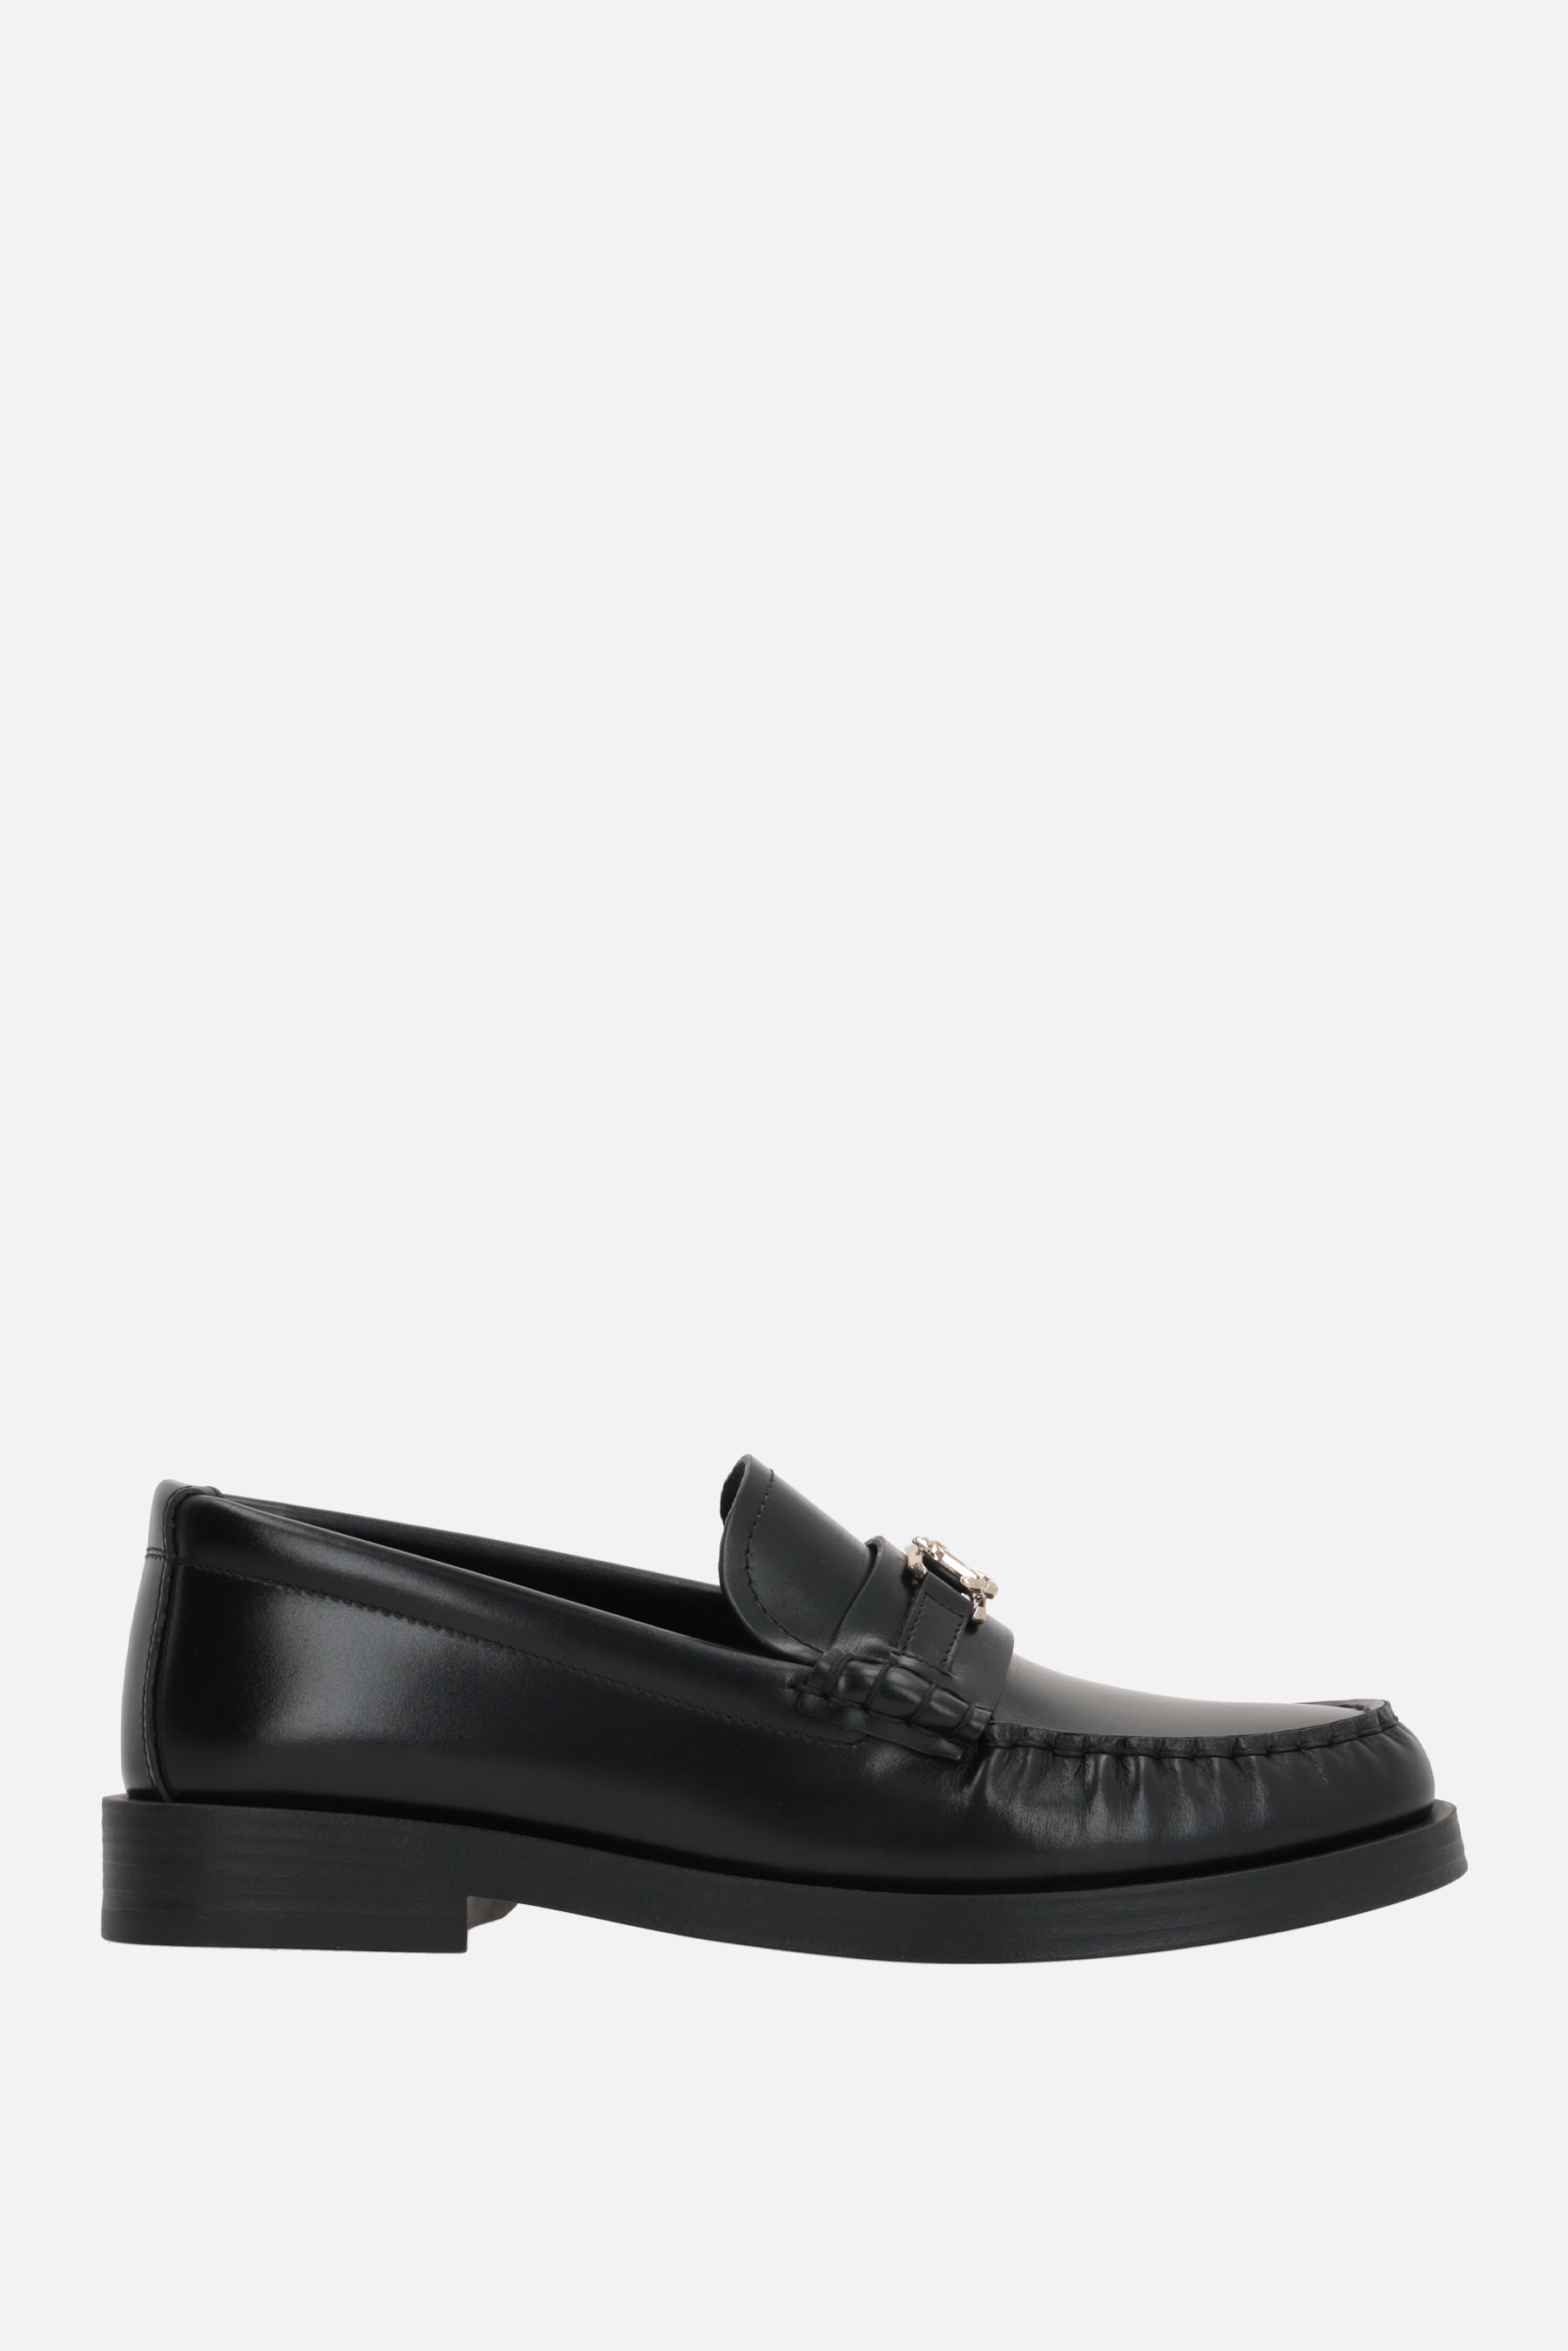 ADDIE/JC LOAFERS IN BOX LEATHER - 1